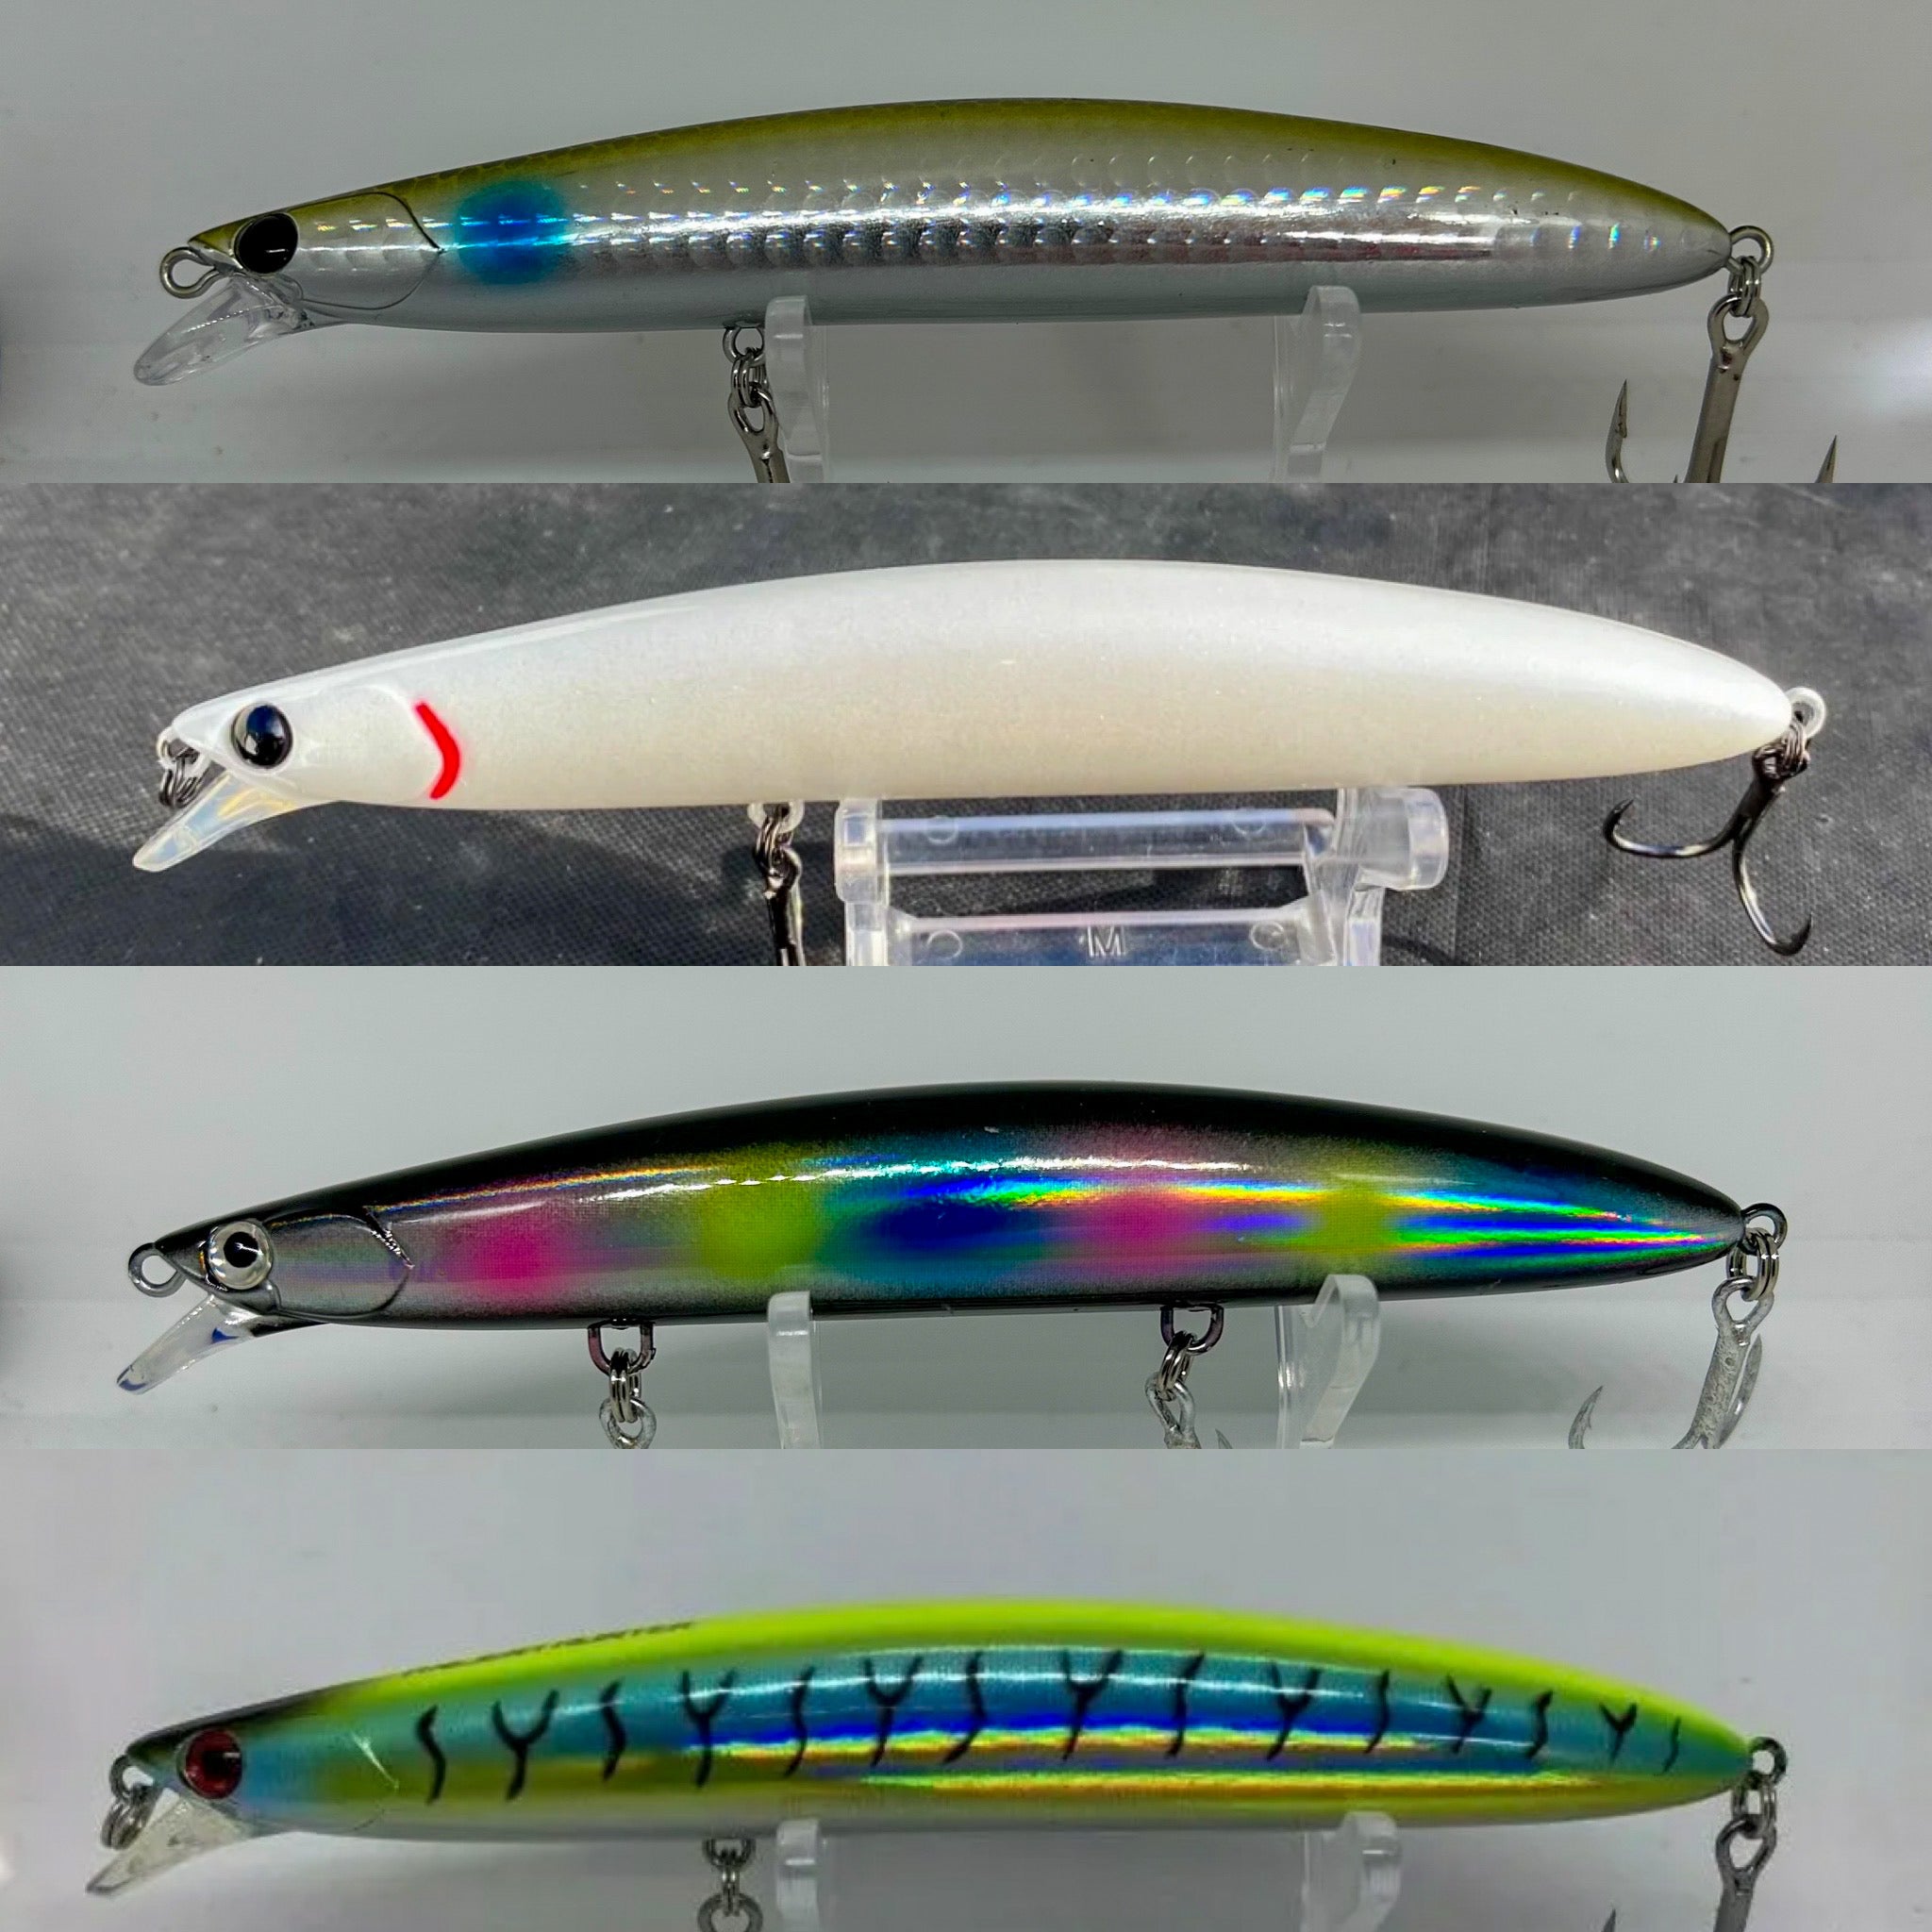 Bass Lures UK - Multi-Buy Products for Bass Lure Fishing